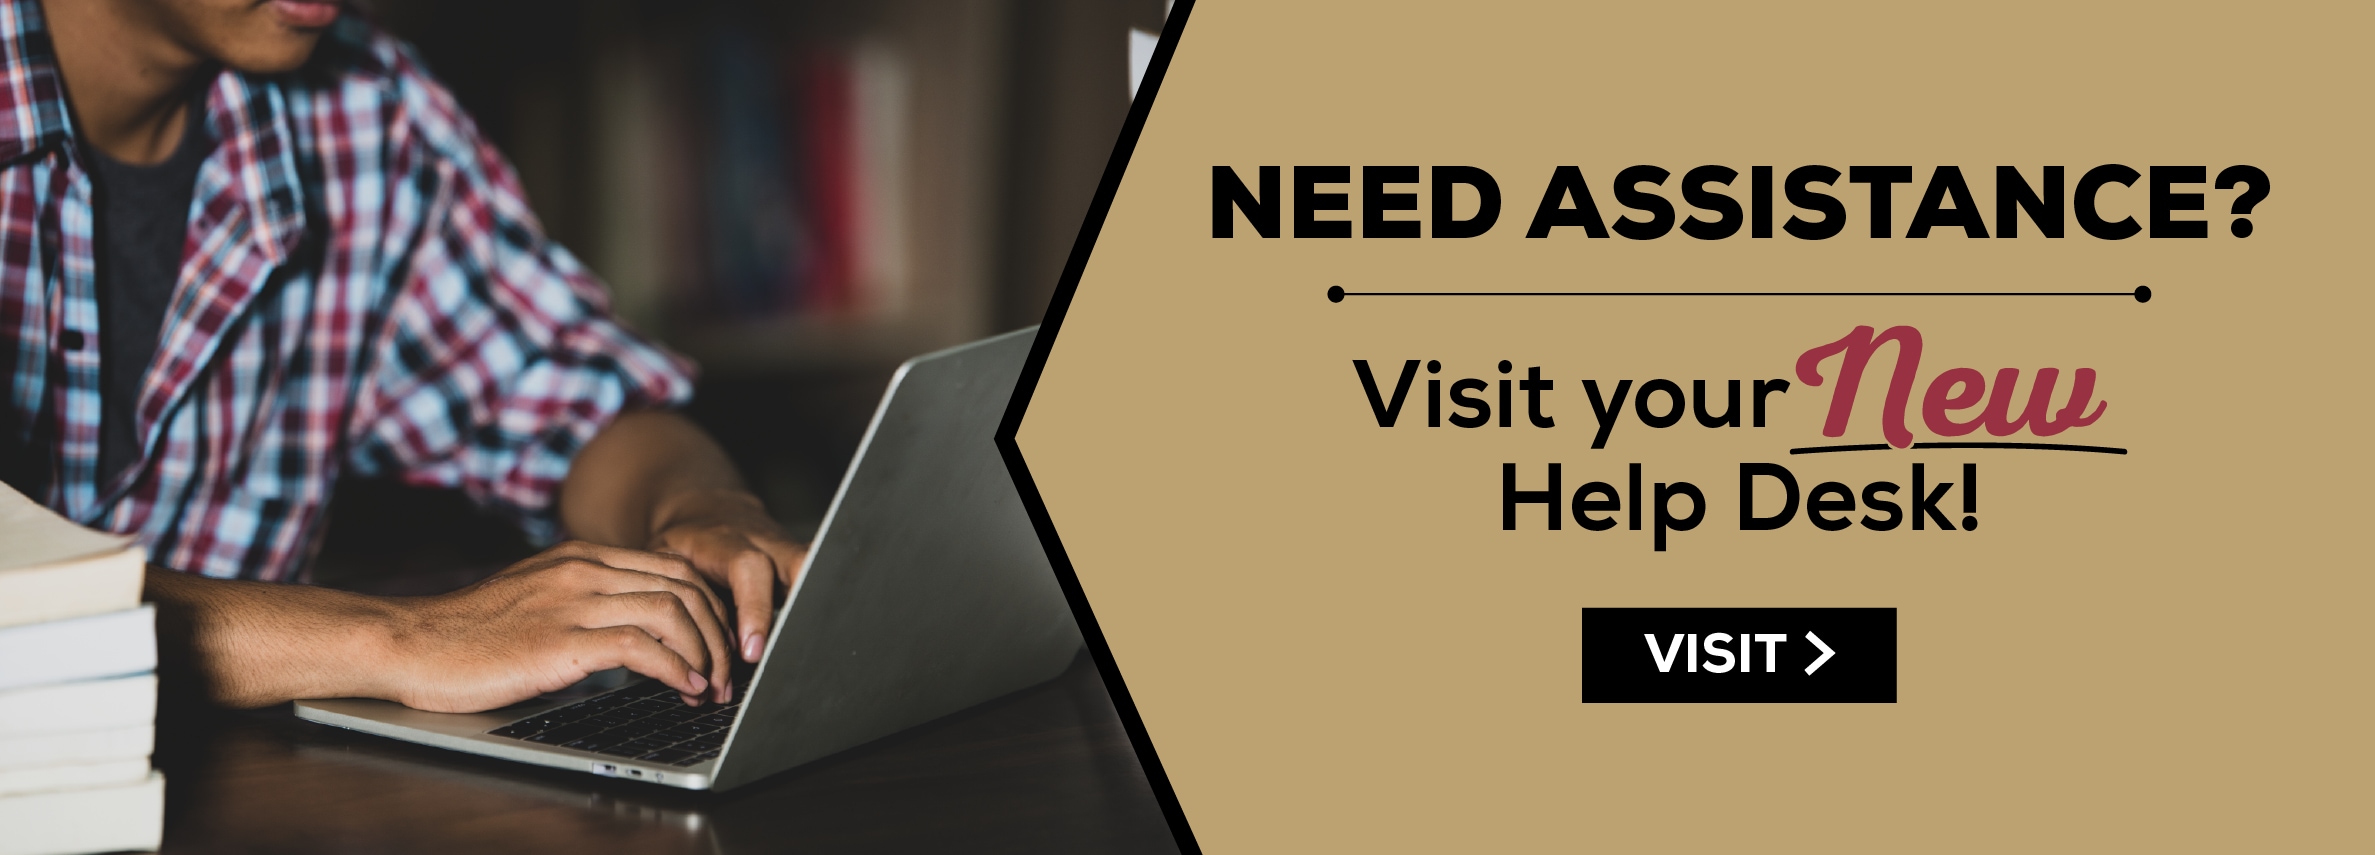 Need assistance? Visit your new help desk! Visit. (new tab)